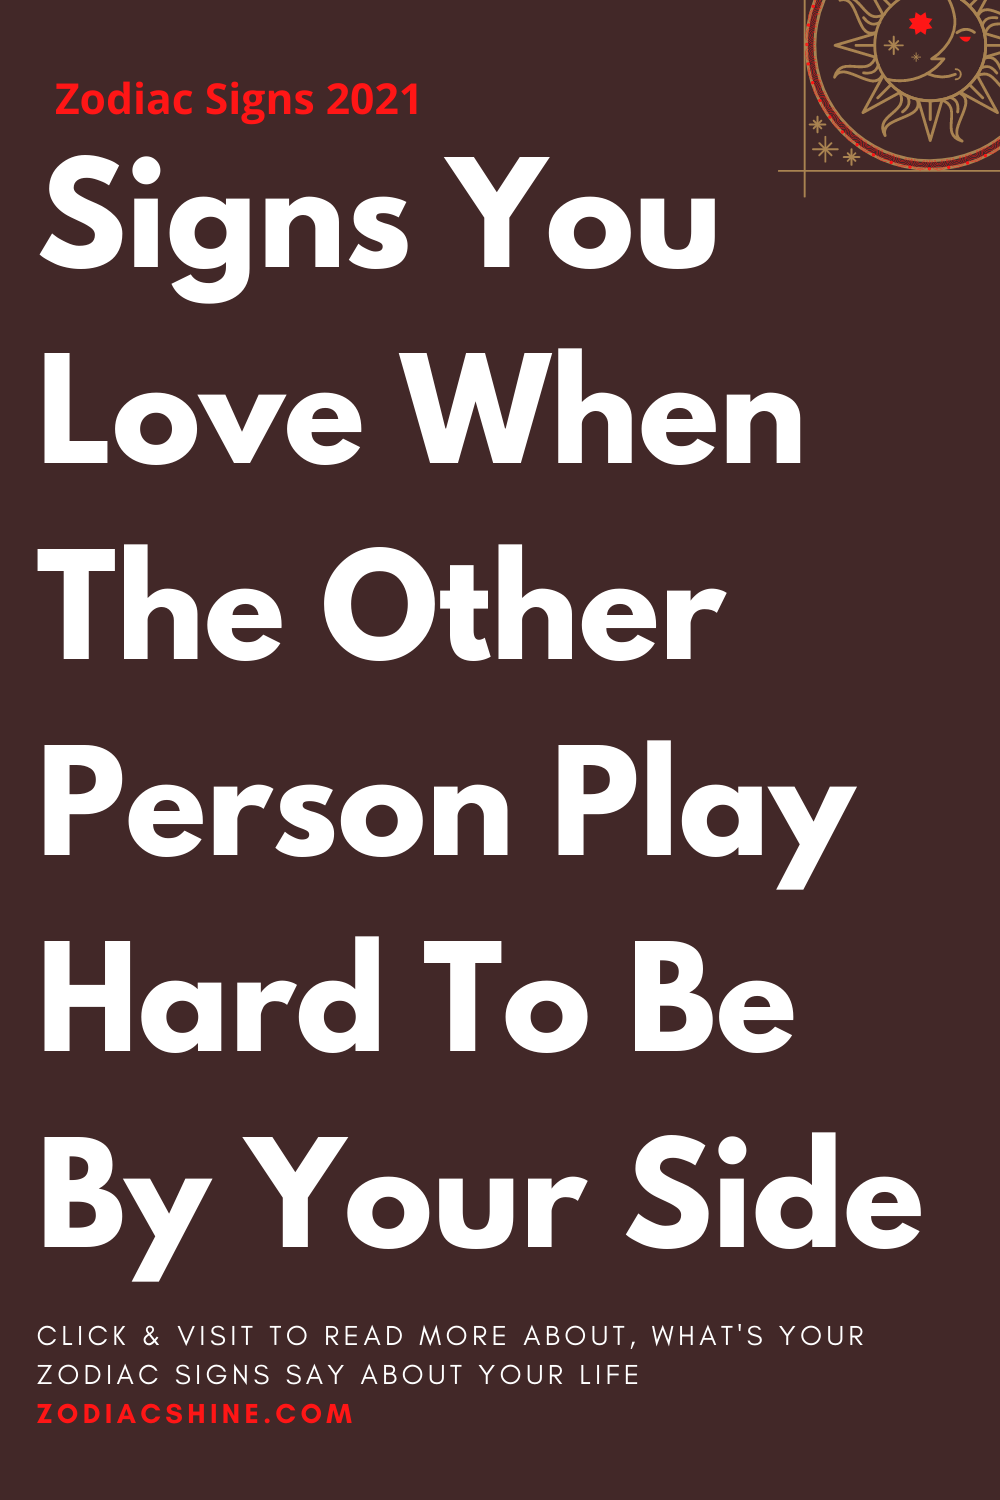 Signs You Love When The Other Person Play Hard To Be By Your Side